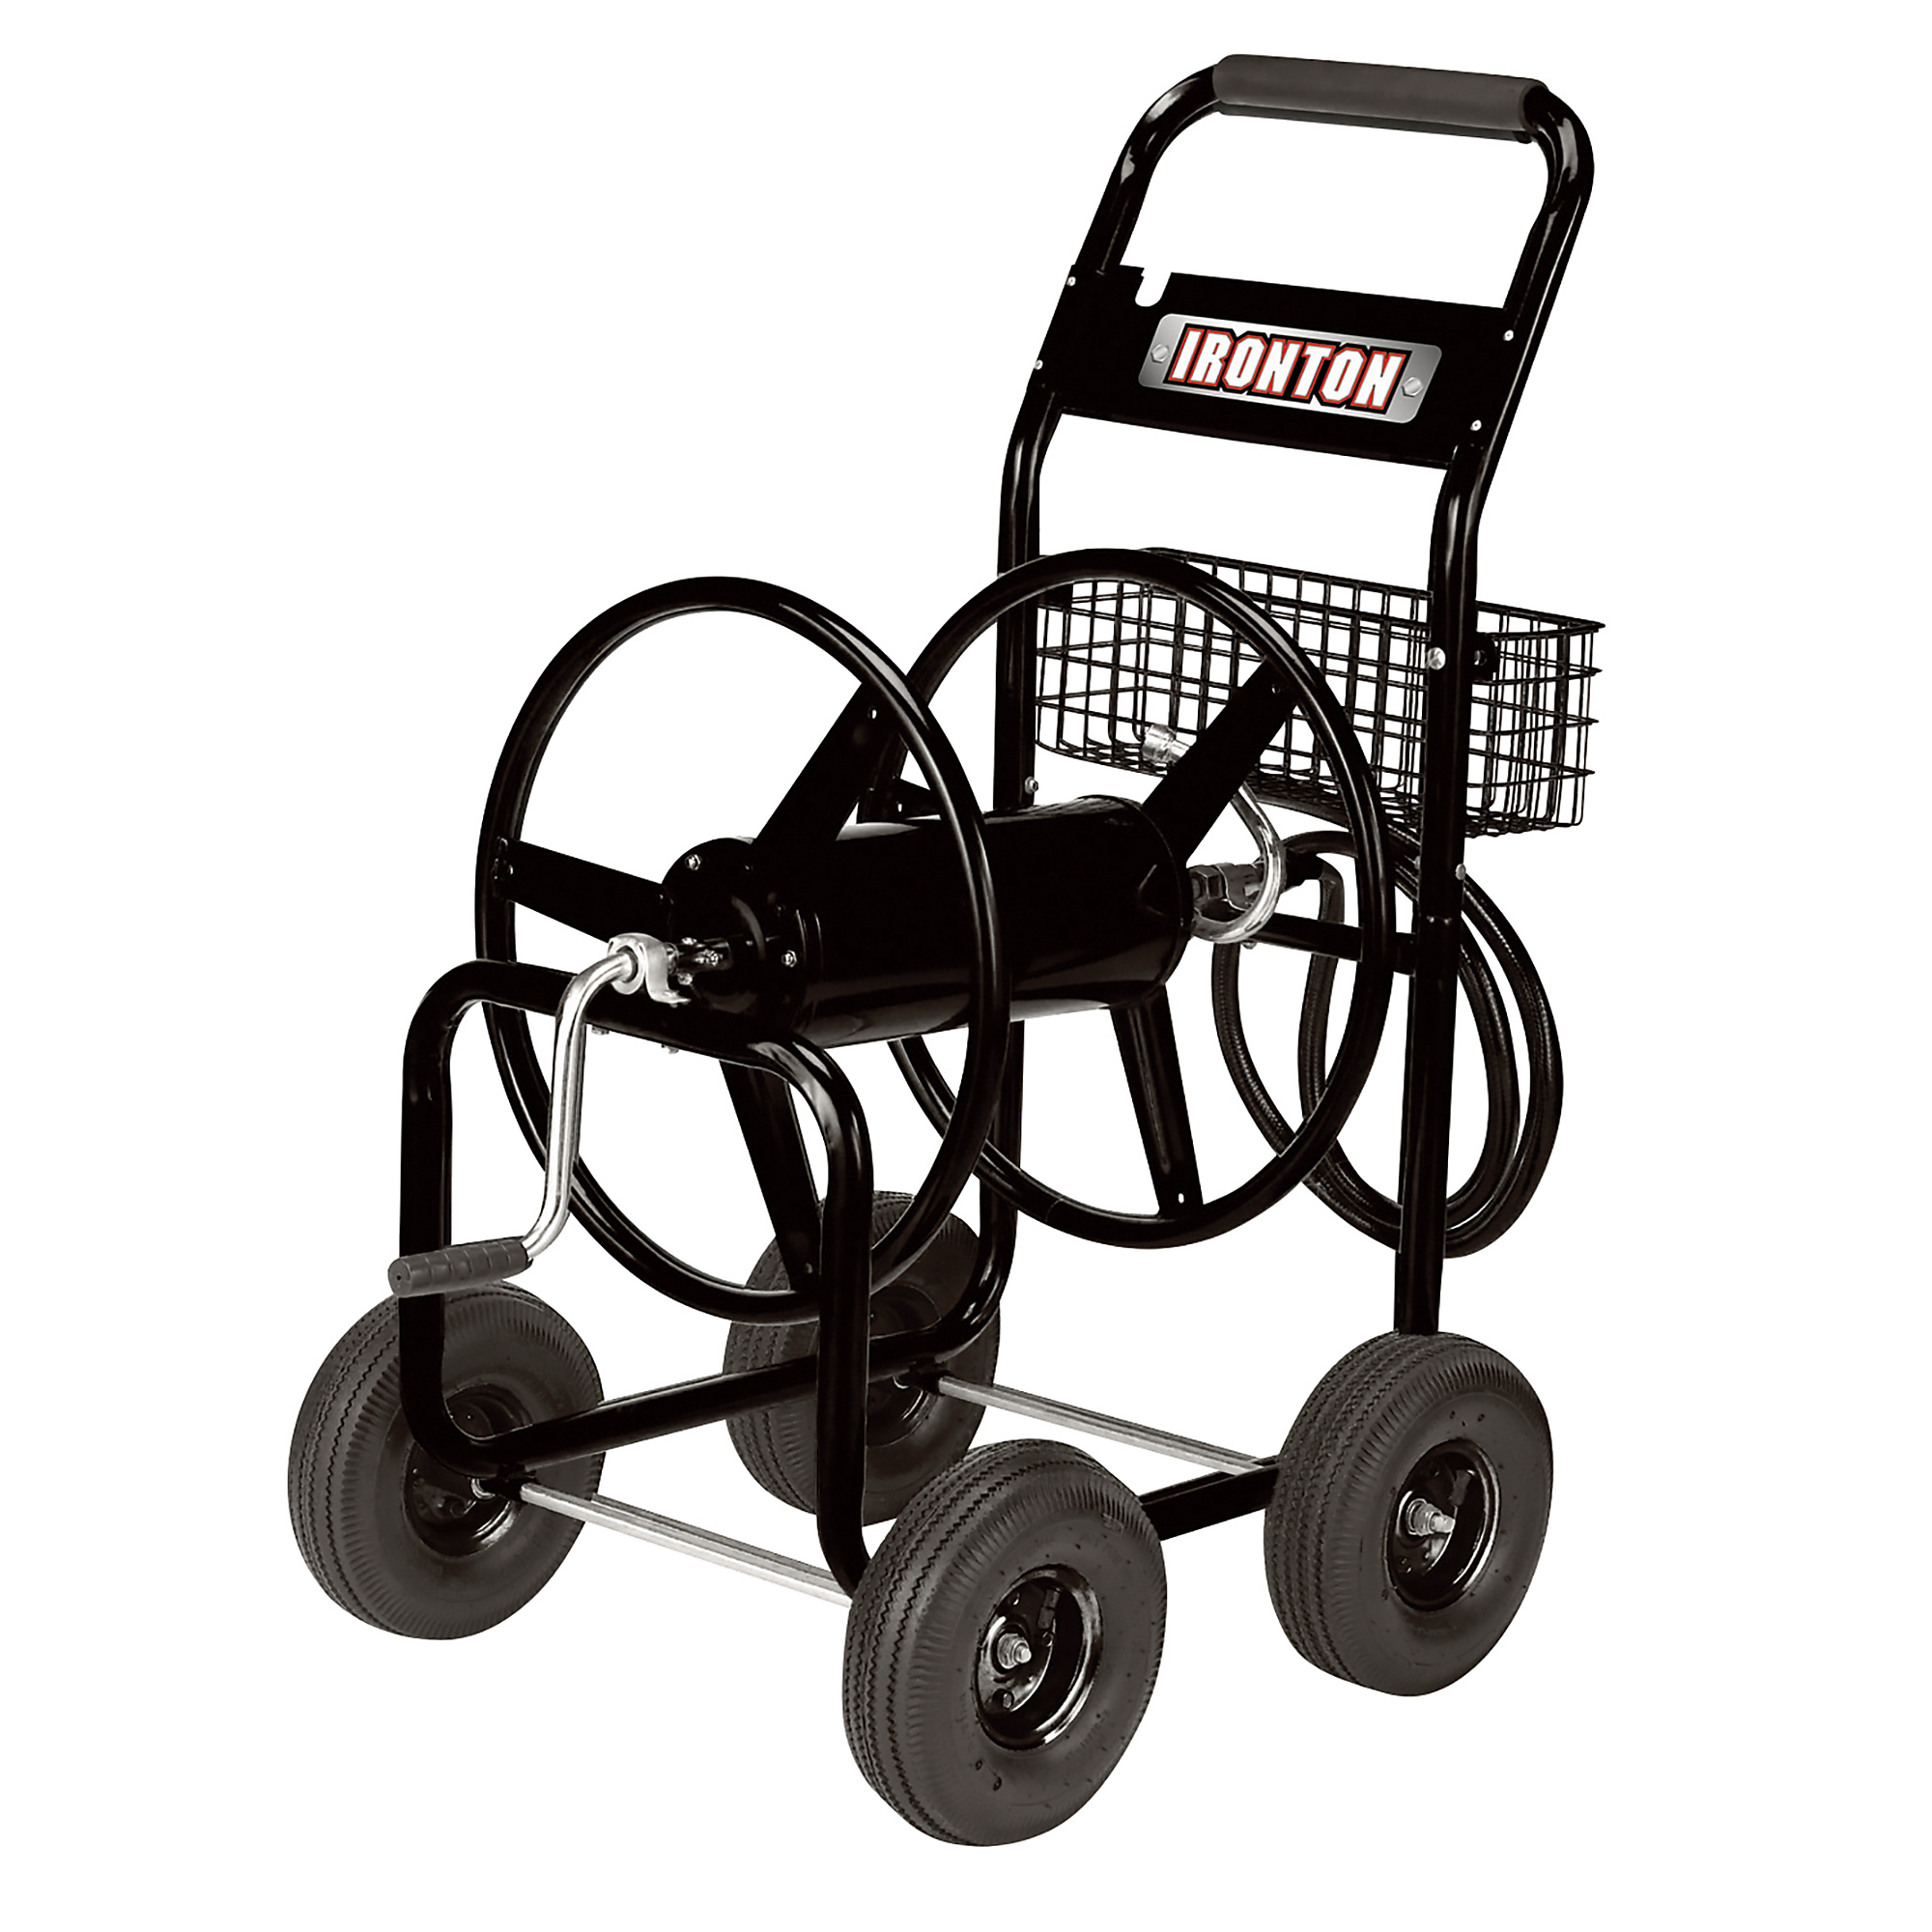 Ironton® Hose Reel Cart, Holds 5/8in. x 300ft. Hose